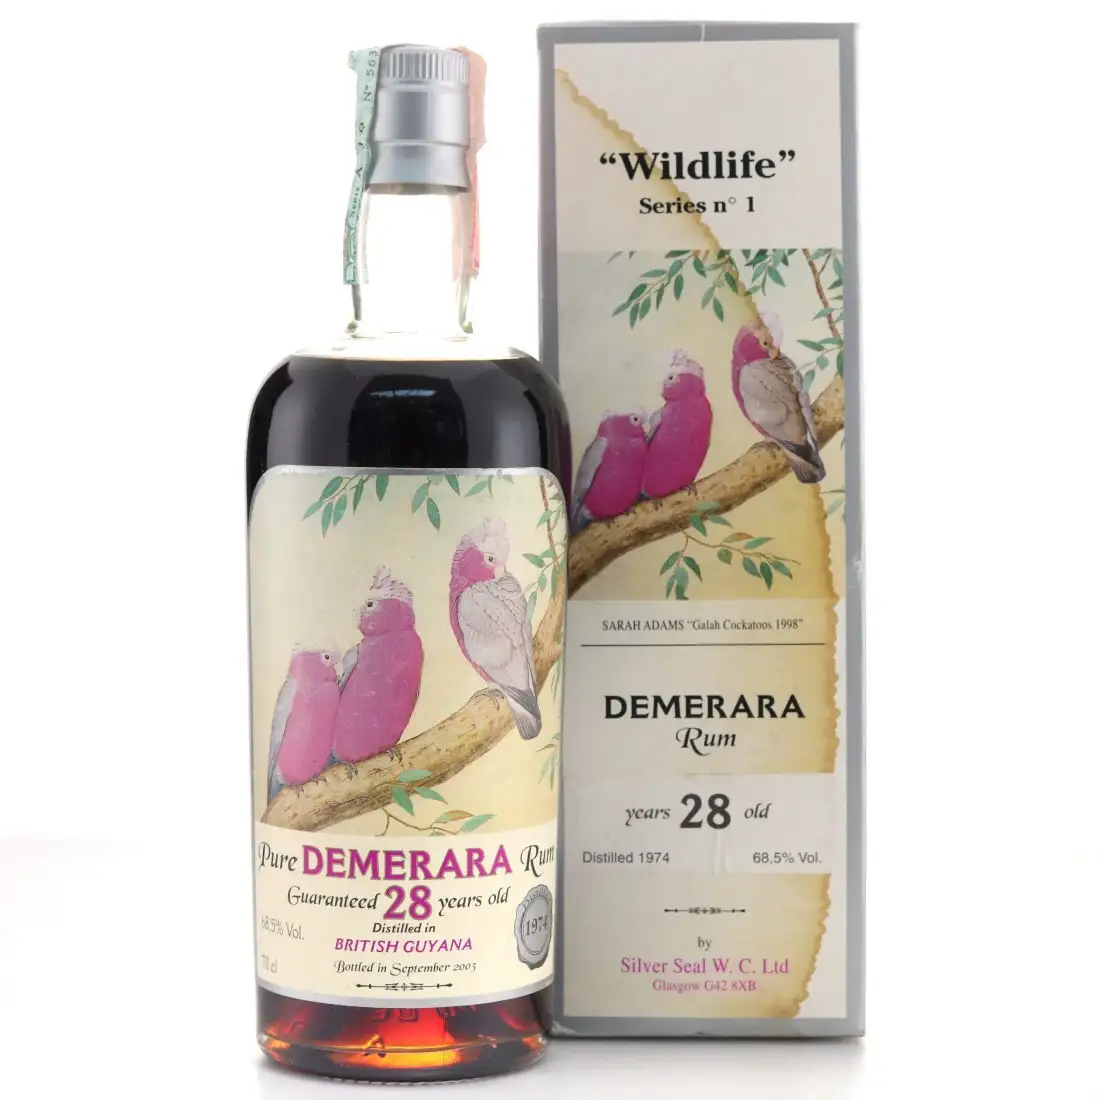 Image of the front of the bottle of the rum Demerara Rum Wildlife Series No. 1